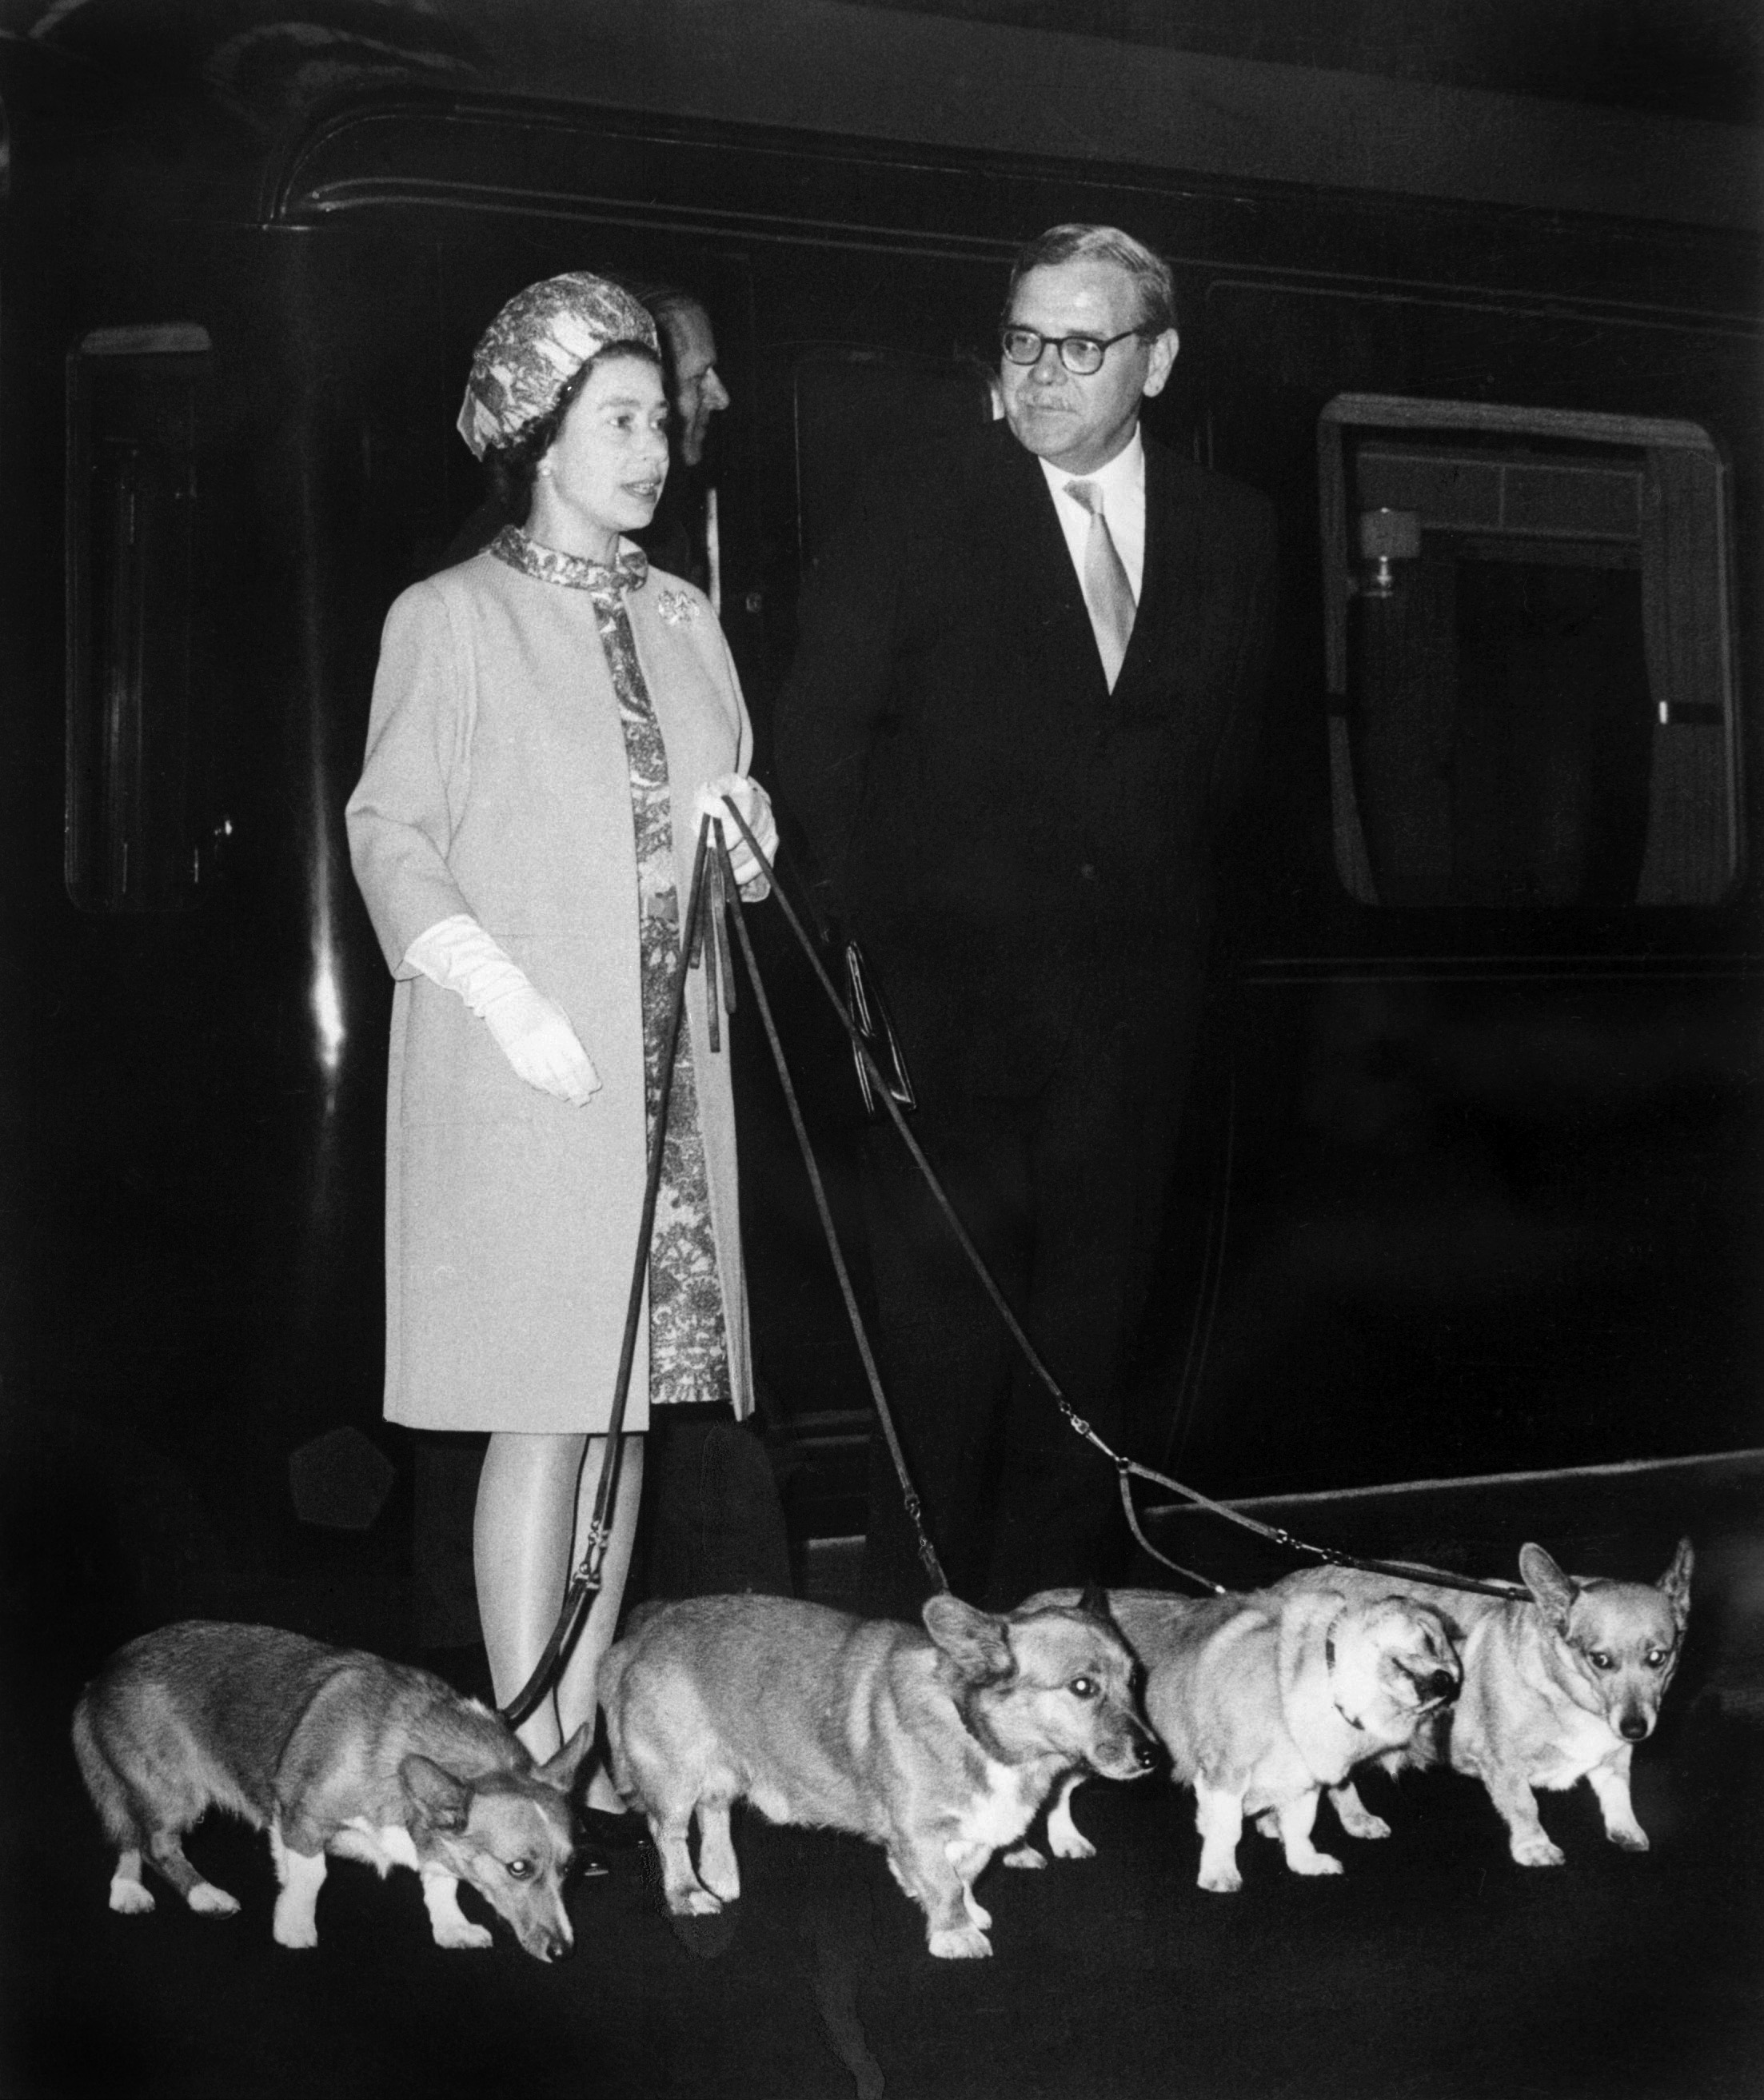 The Queen and her corgis